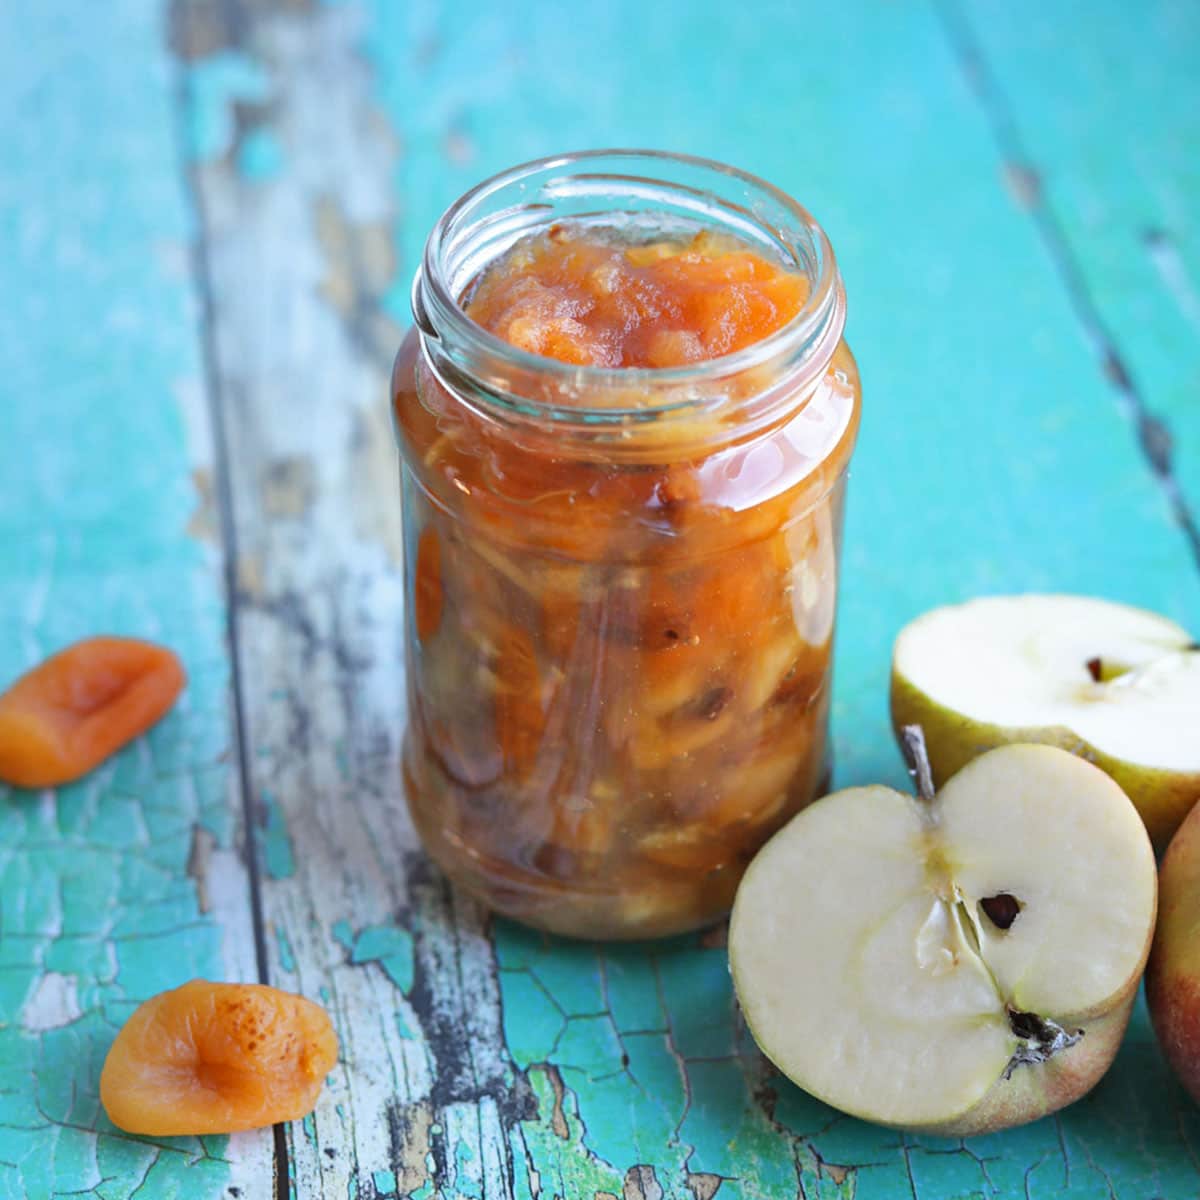 Apricot and Apple Chutney